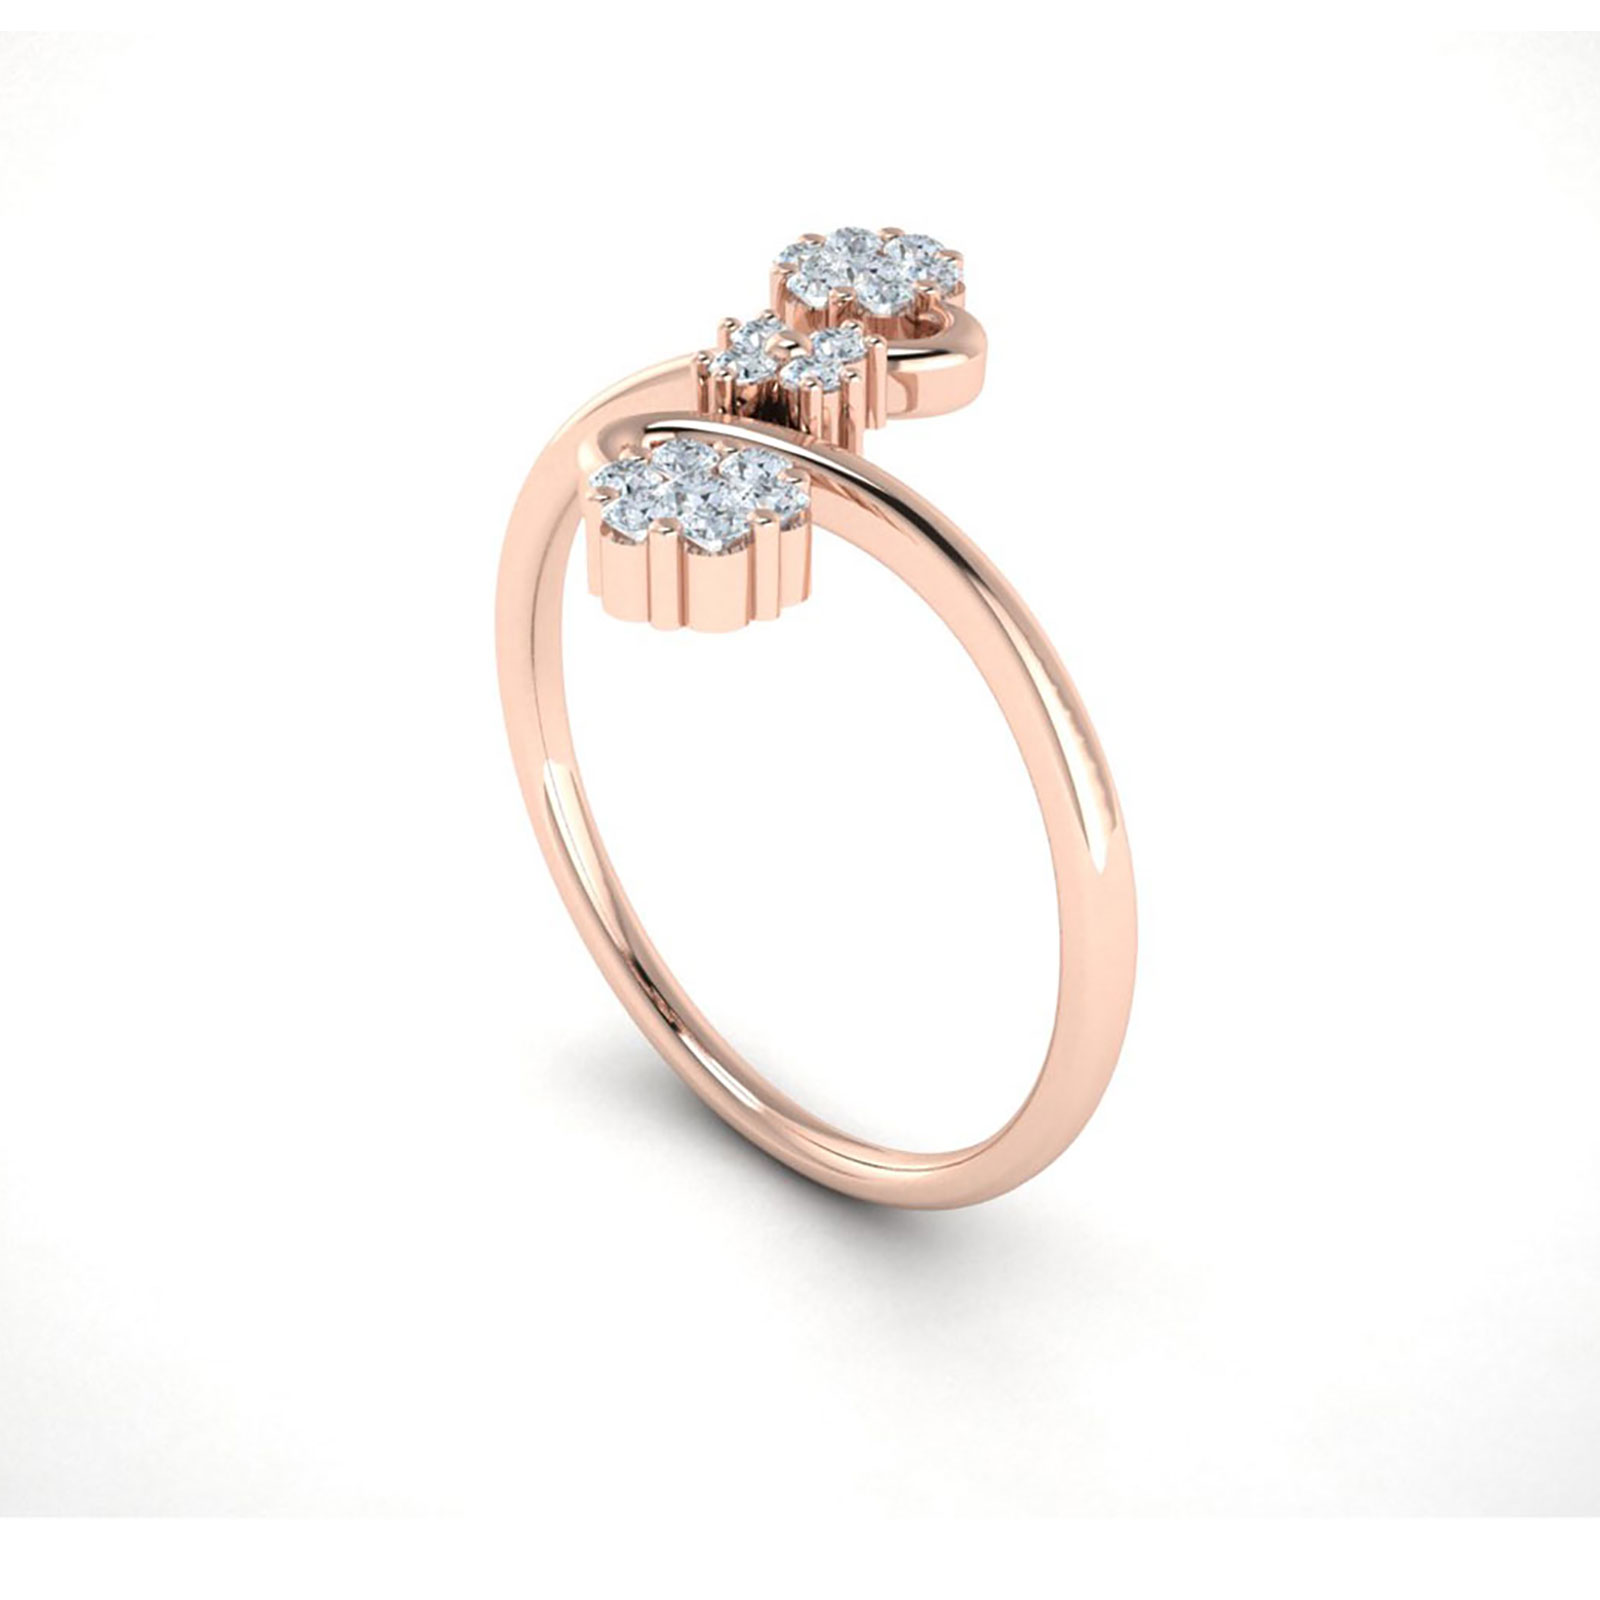 Jewel We Sell Natural 1ct Round Cut Diamond Forever Us Women's Fancy Bridal Ring Anniversary 10K Rose Gold